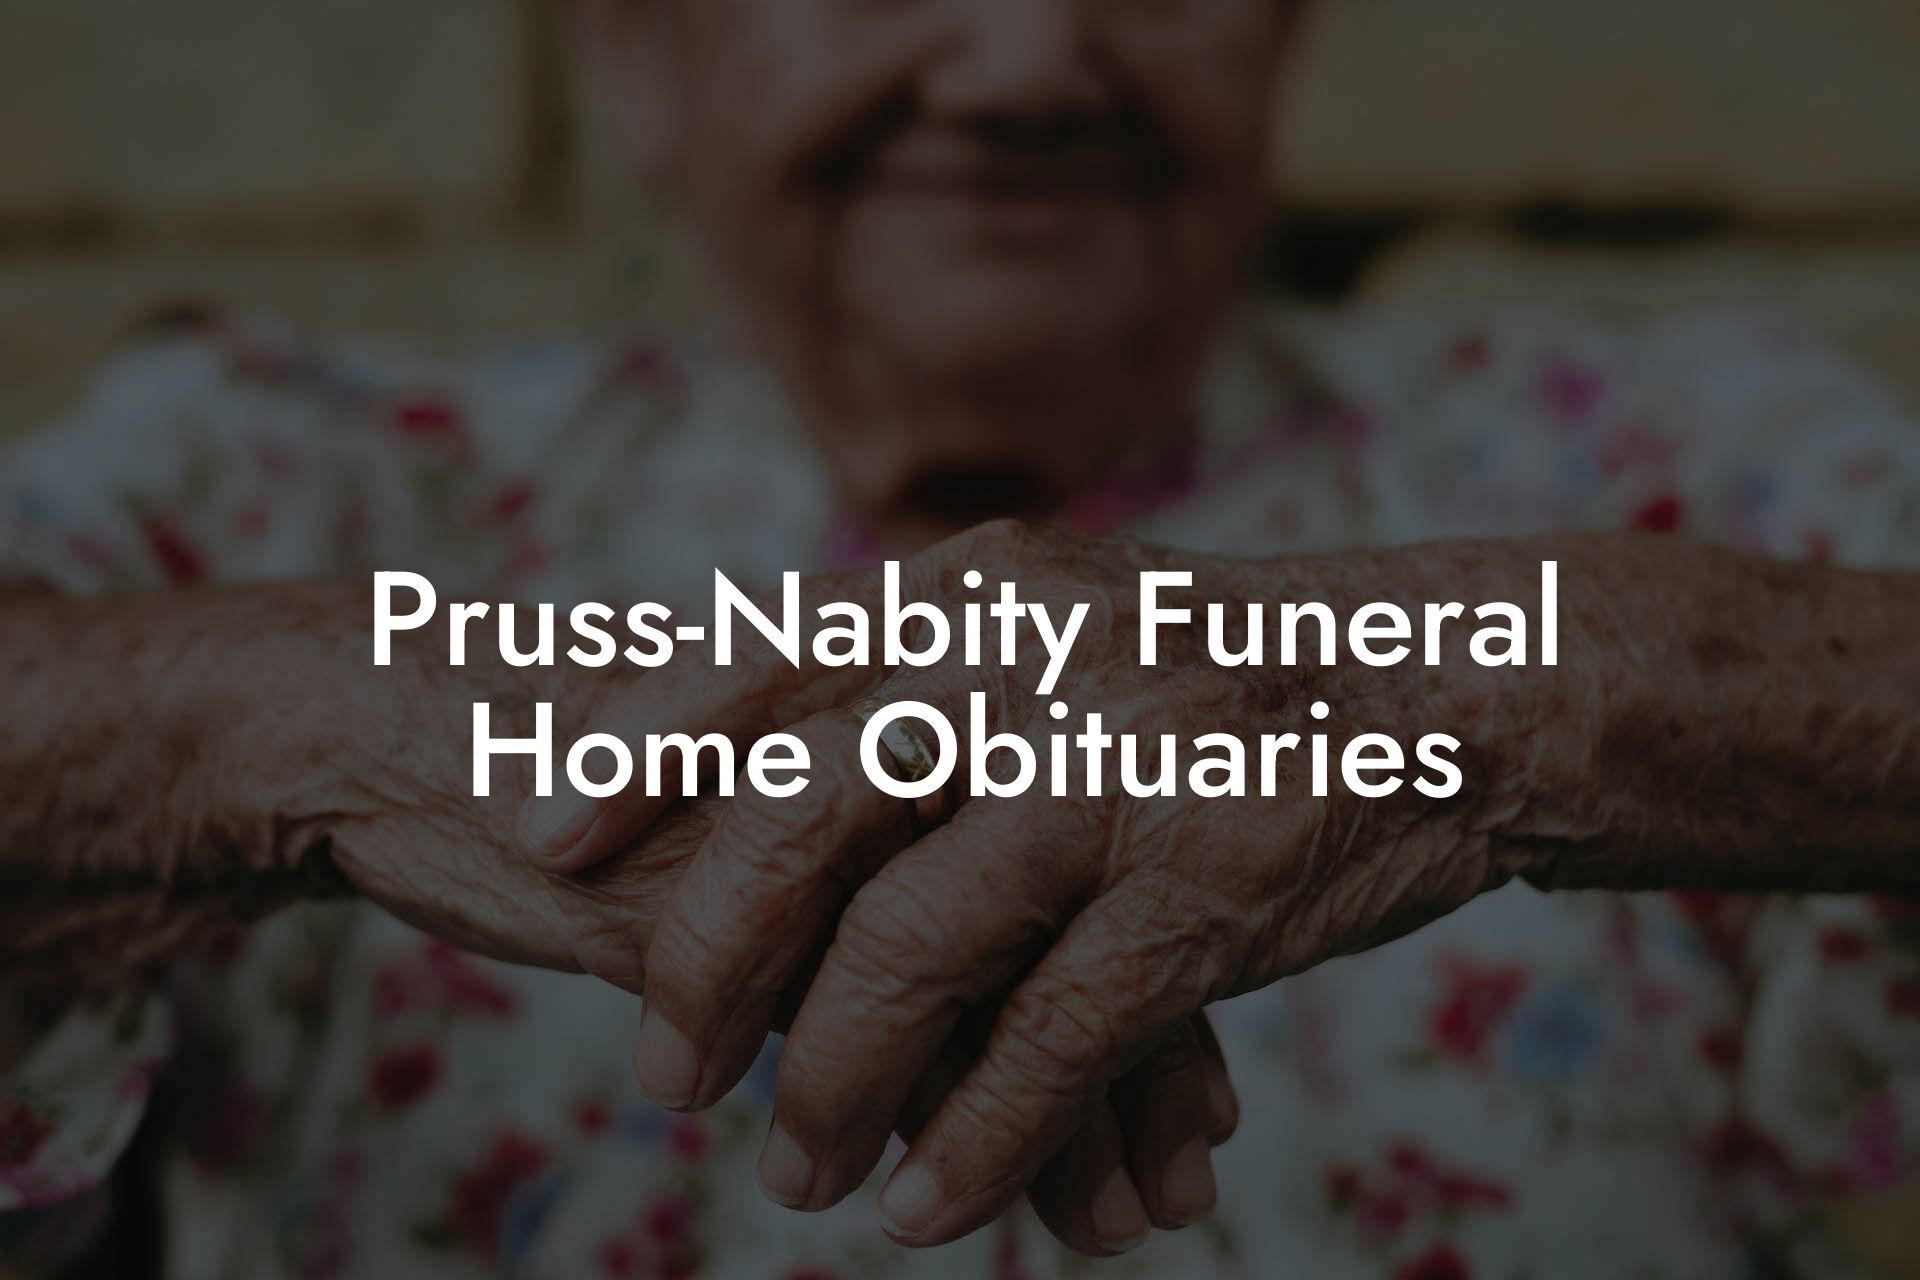 Pruss-Nabity Funeral Home Obituaries